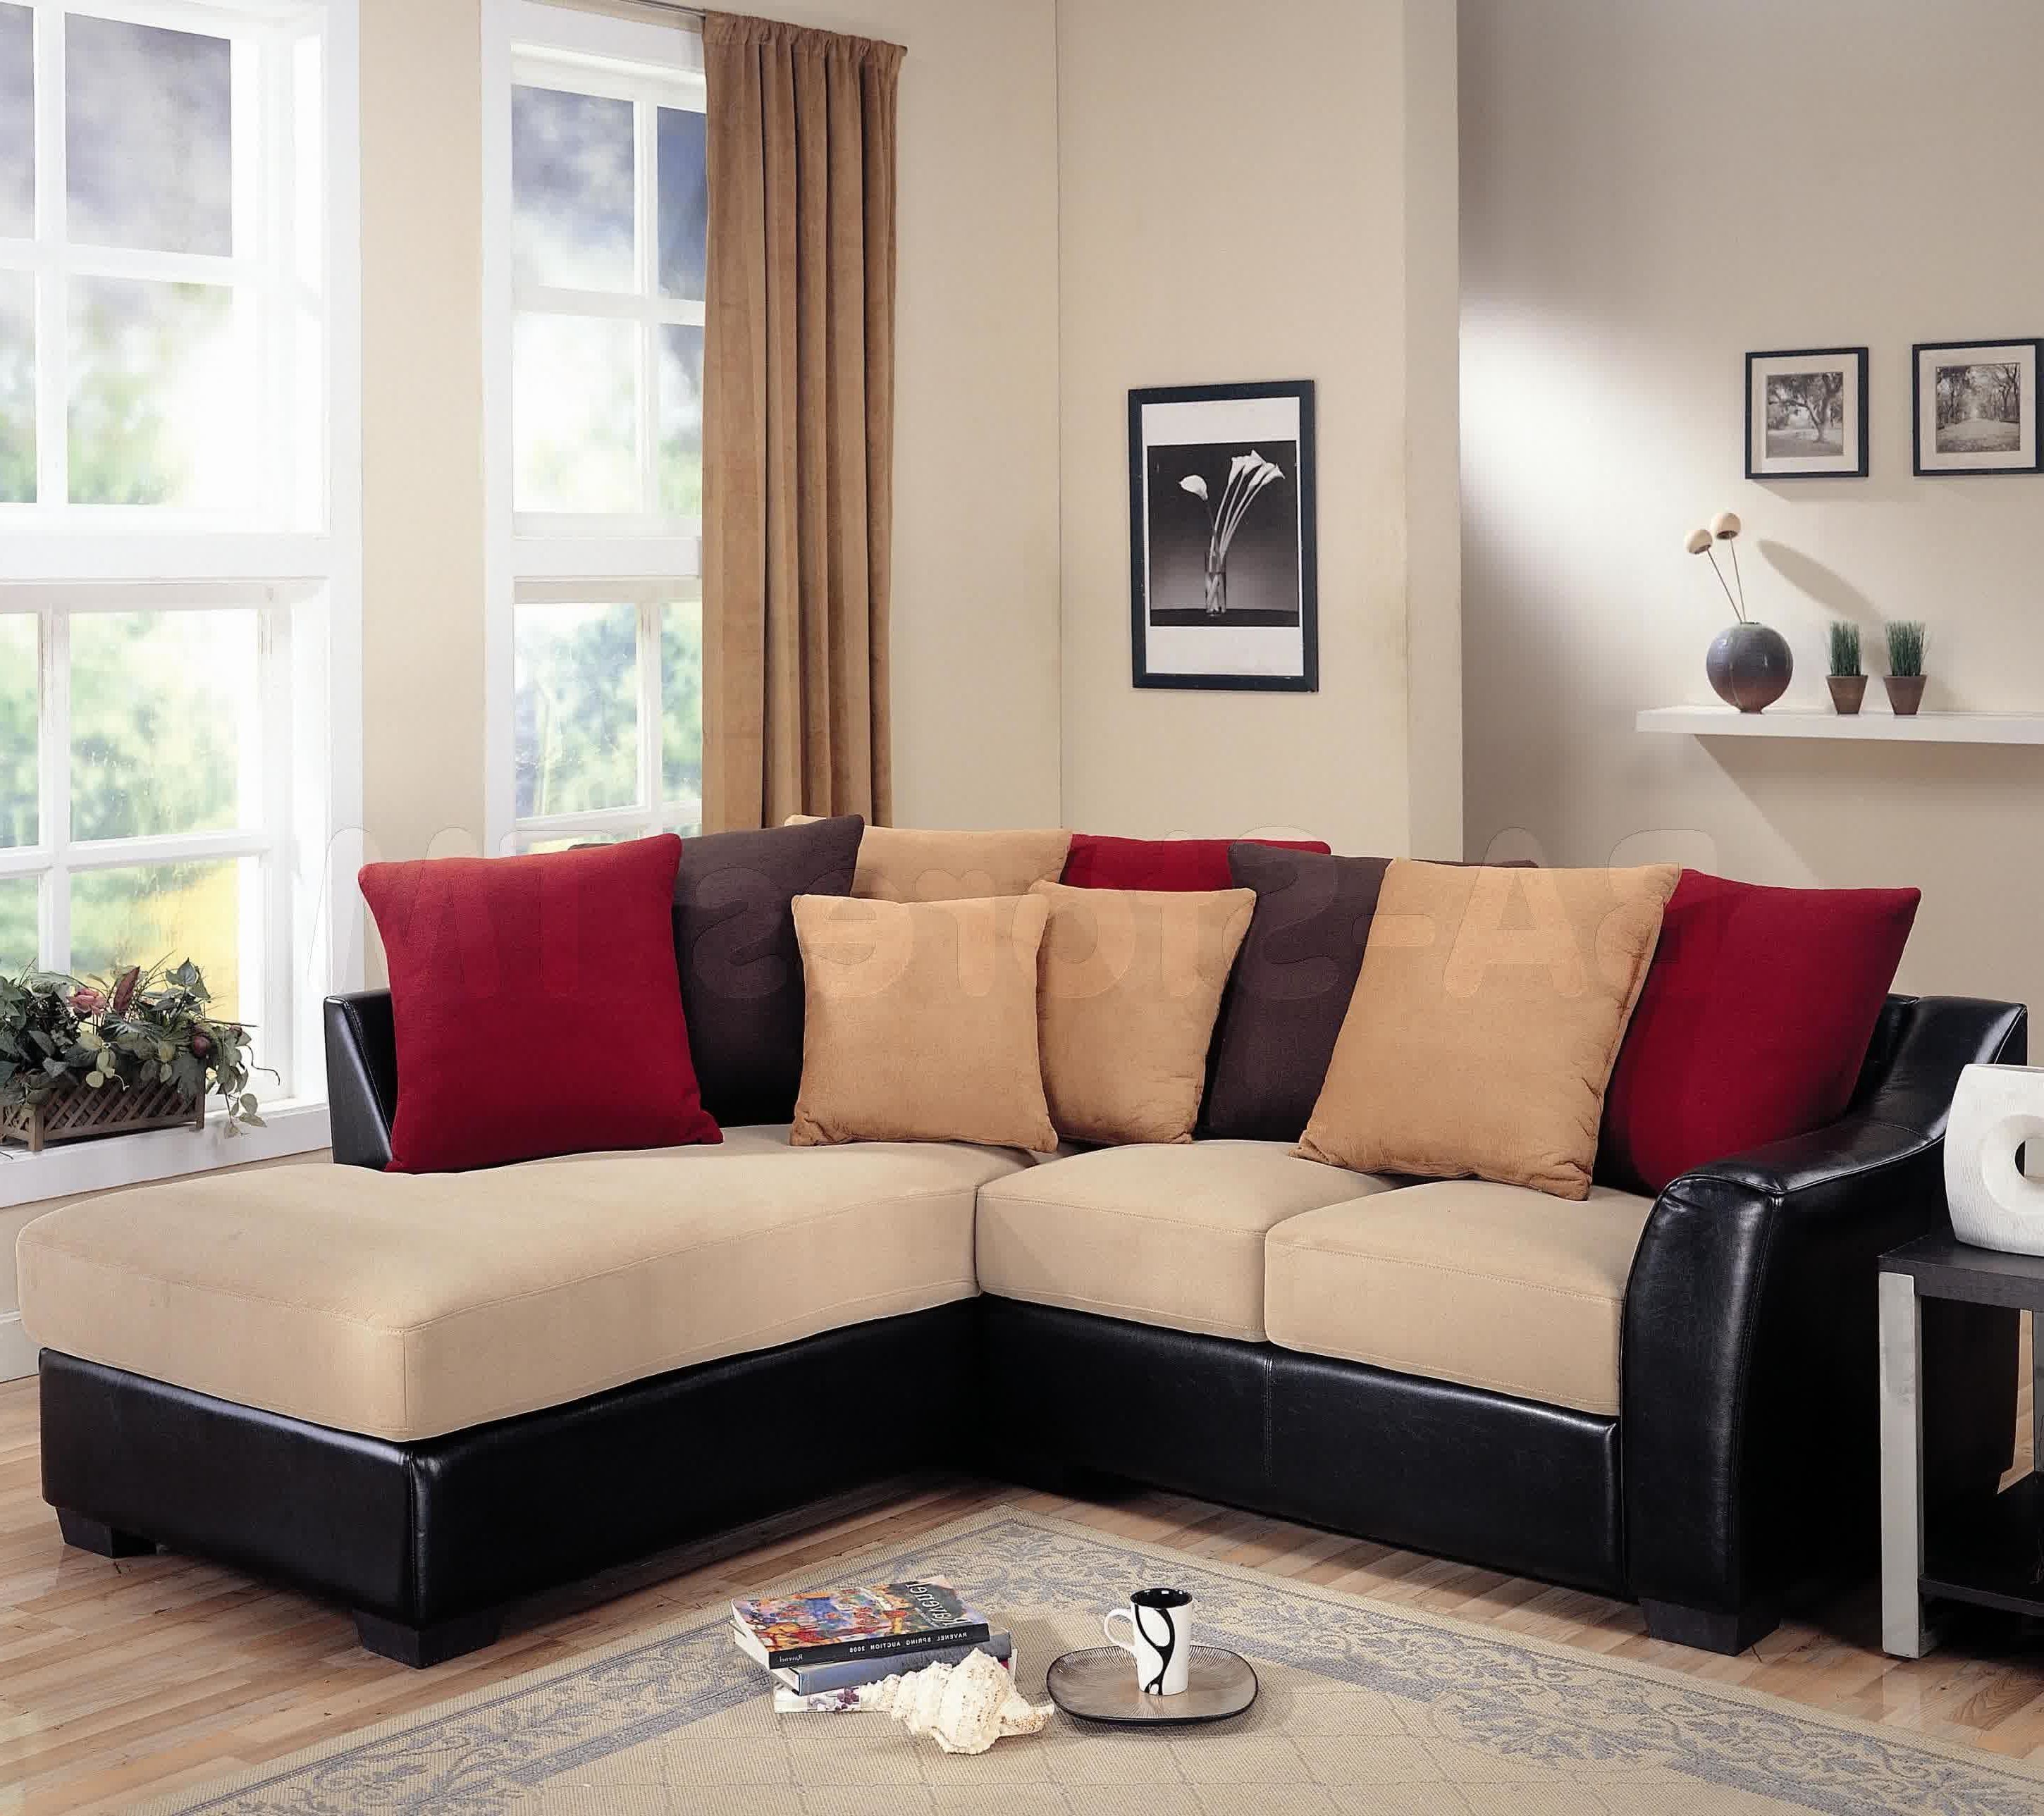 Home Designs : Bobs Living Room Sets Cheap Sectional Sofas Under With Regard To Famous On Sale Sectional Sofas (View 1 of 20)